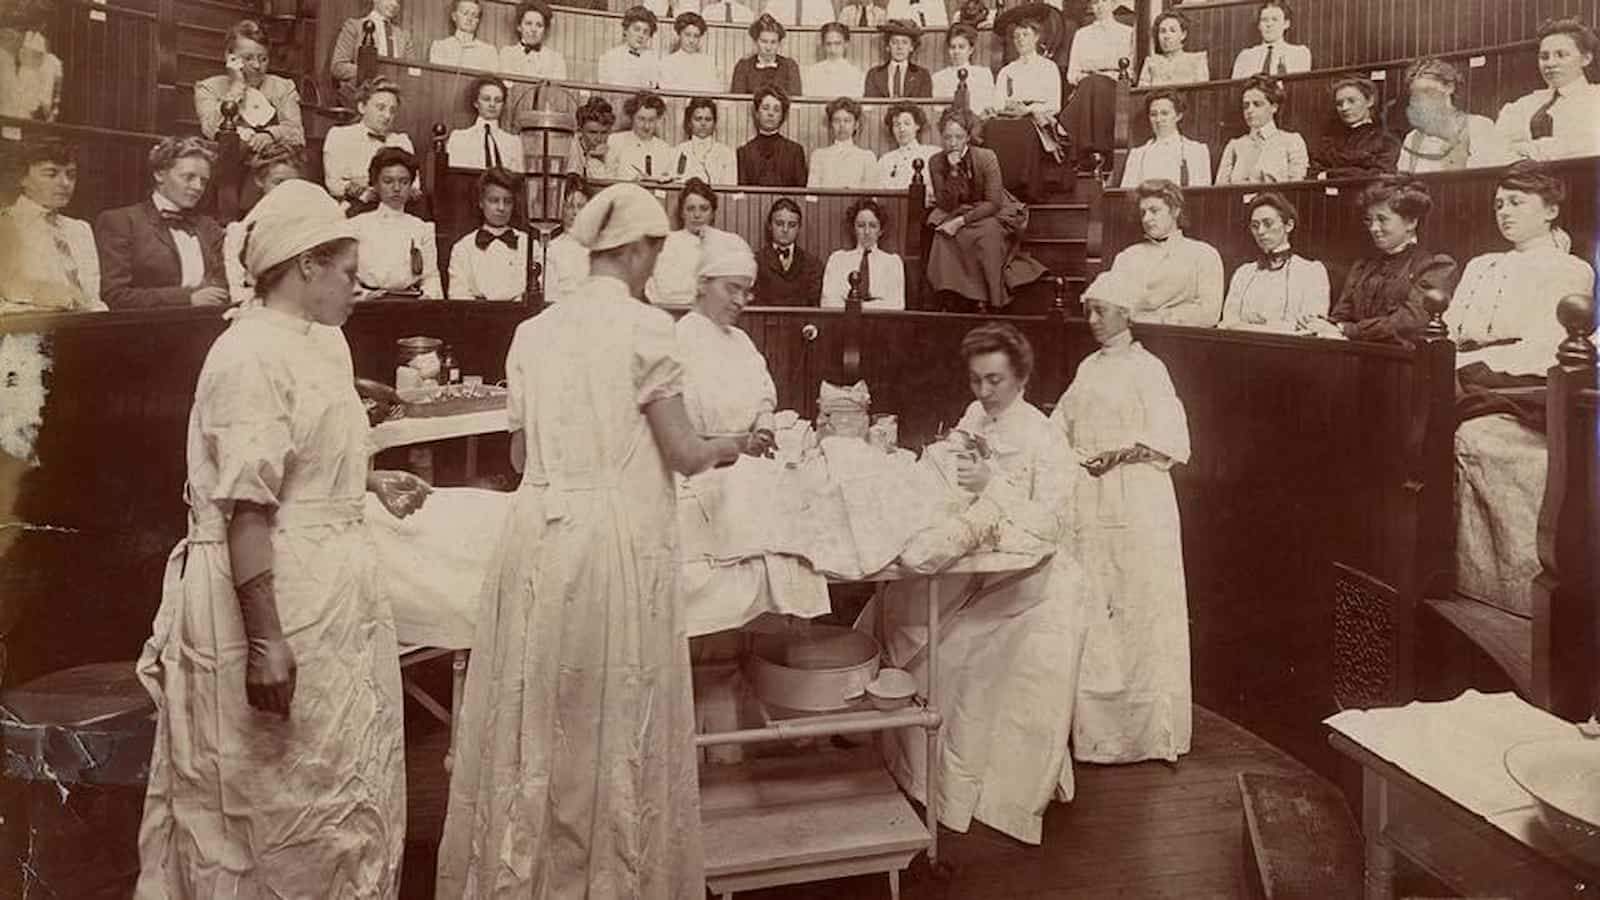 Students in the operating amphitheatre of the Woman's Medical College of Pennsylvania in 1903.